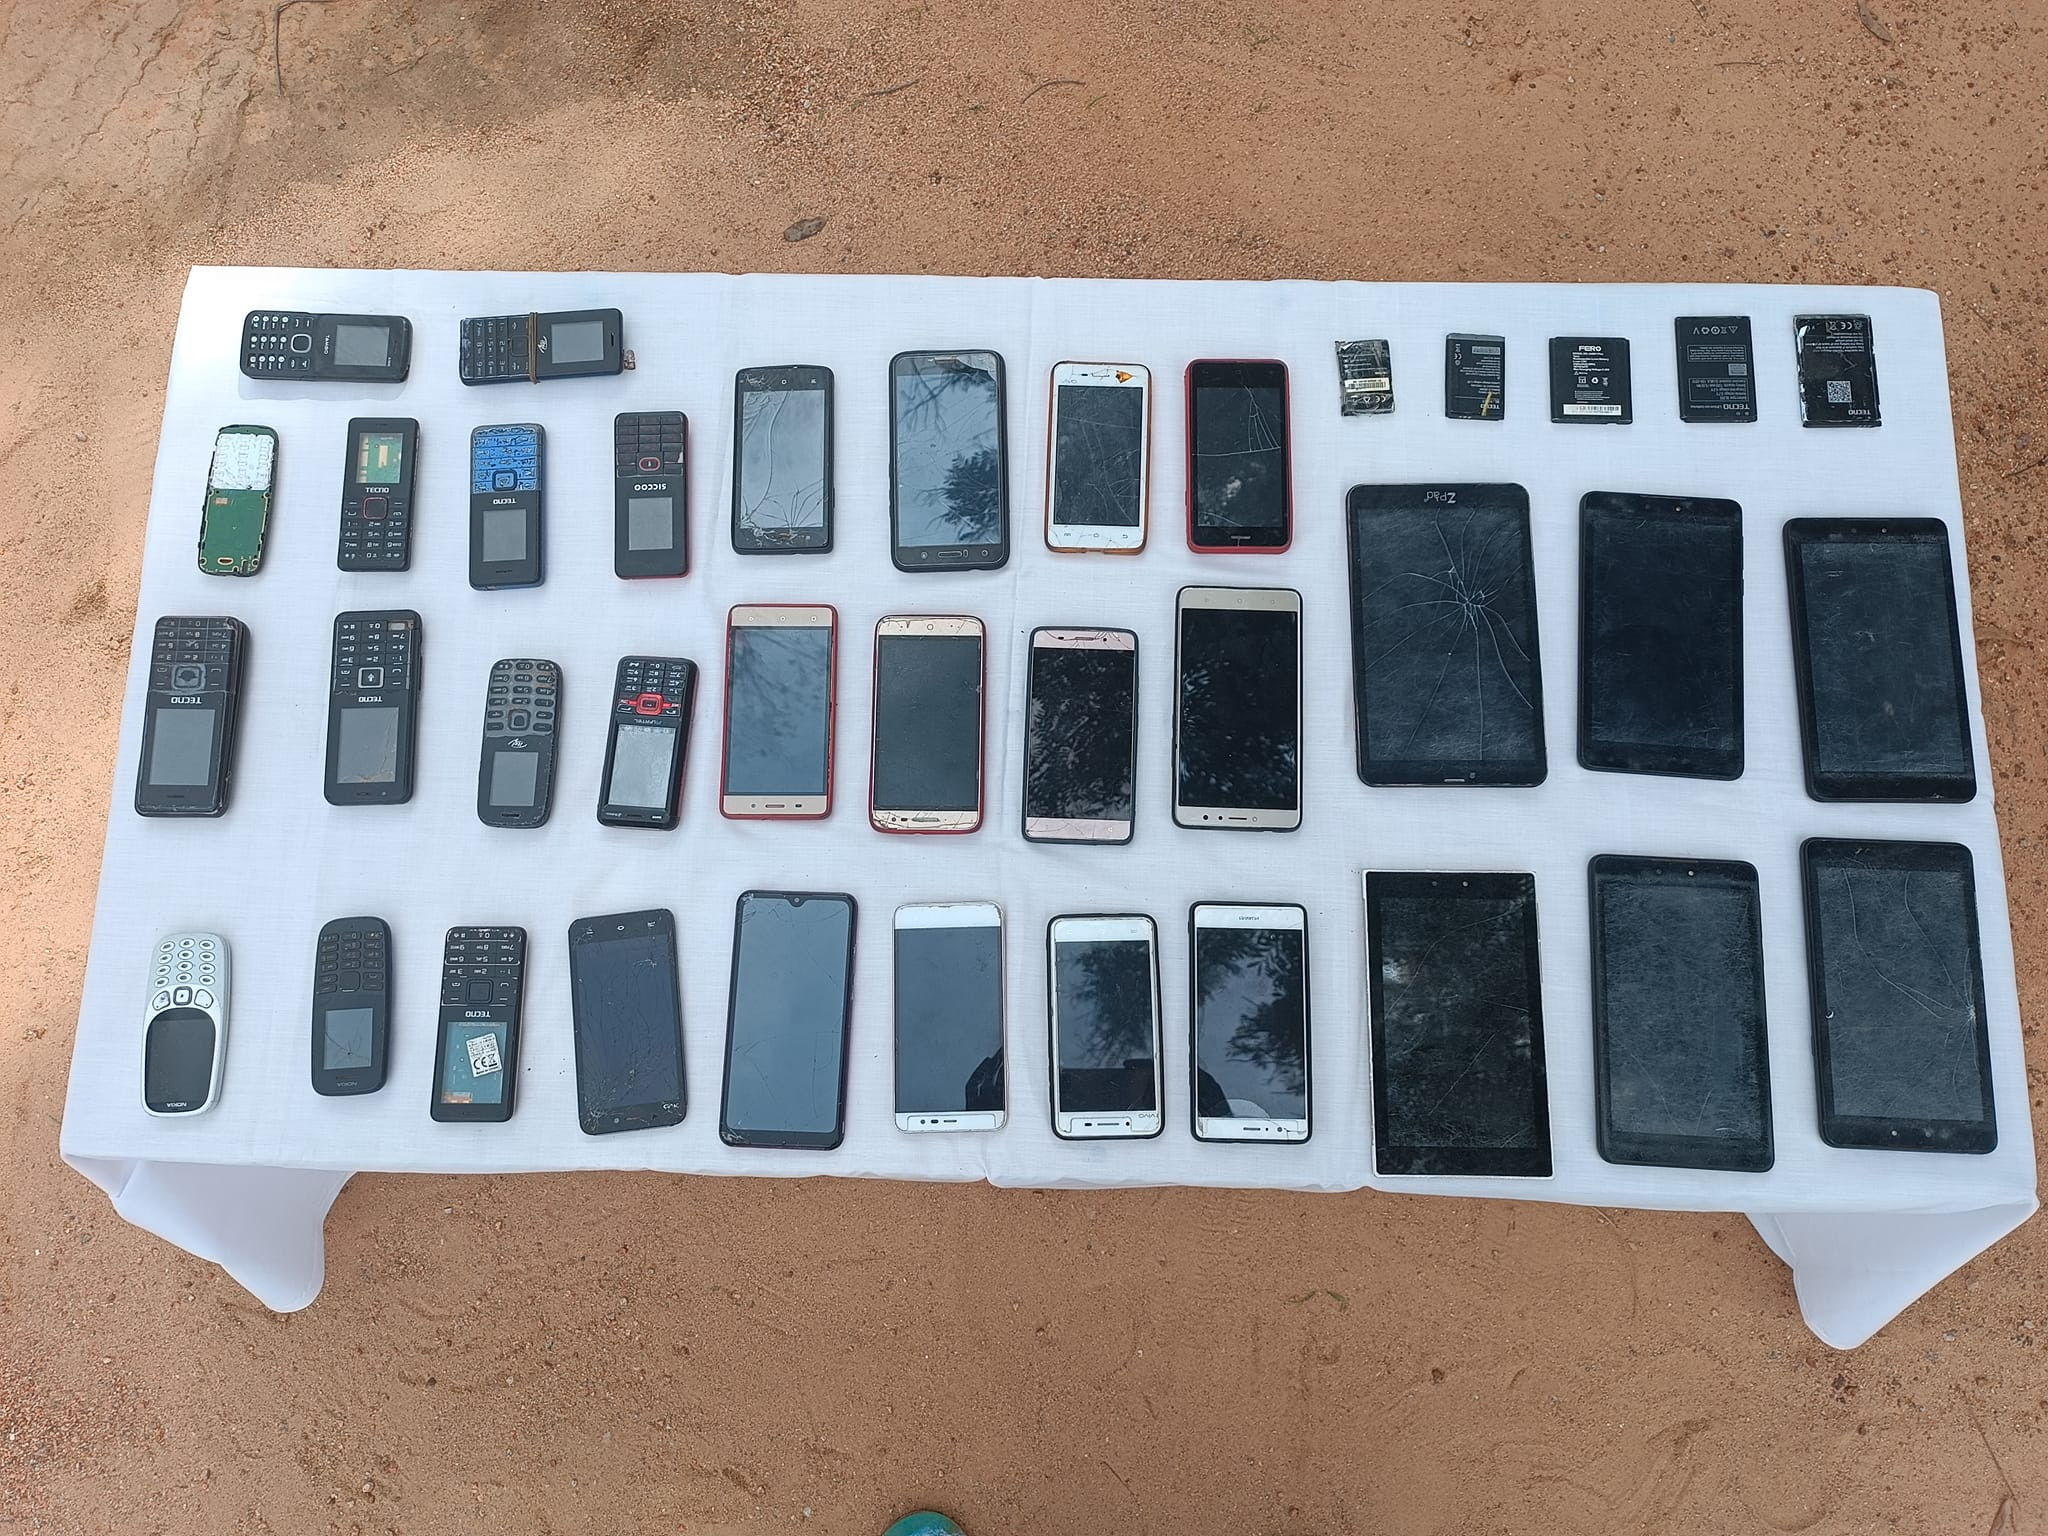 Police arrest ex-convict for burglary and theft in Kano, recover 32 stolen phones 